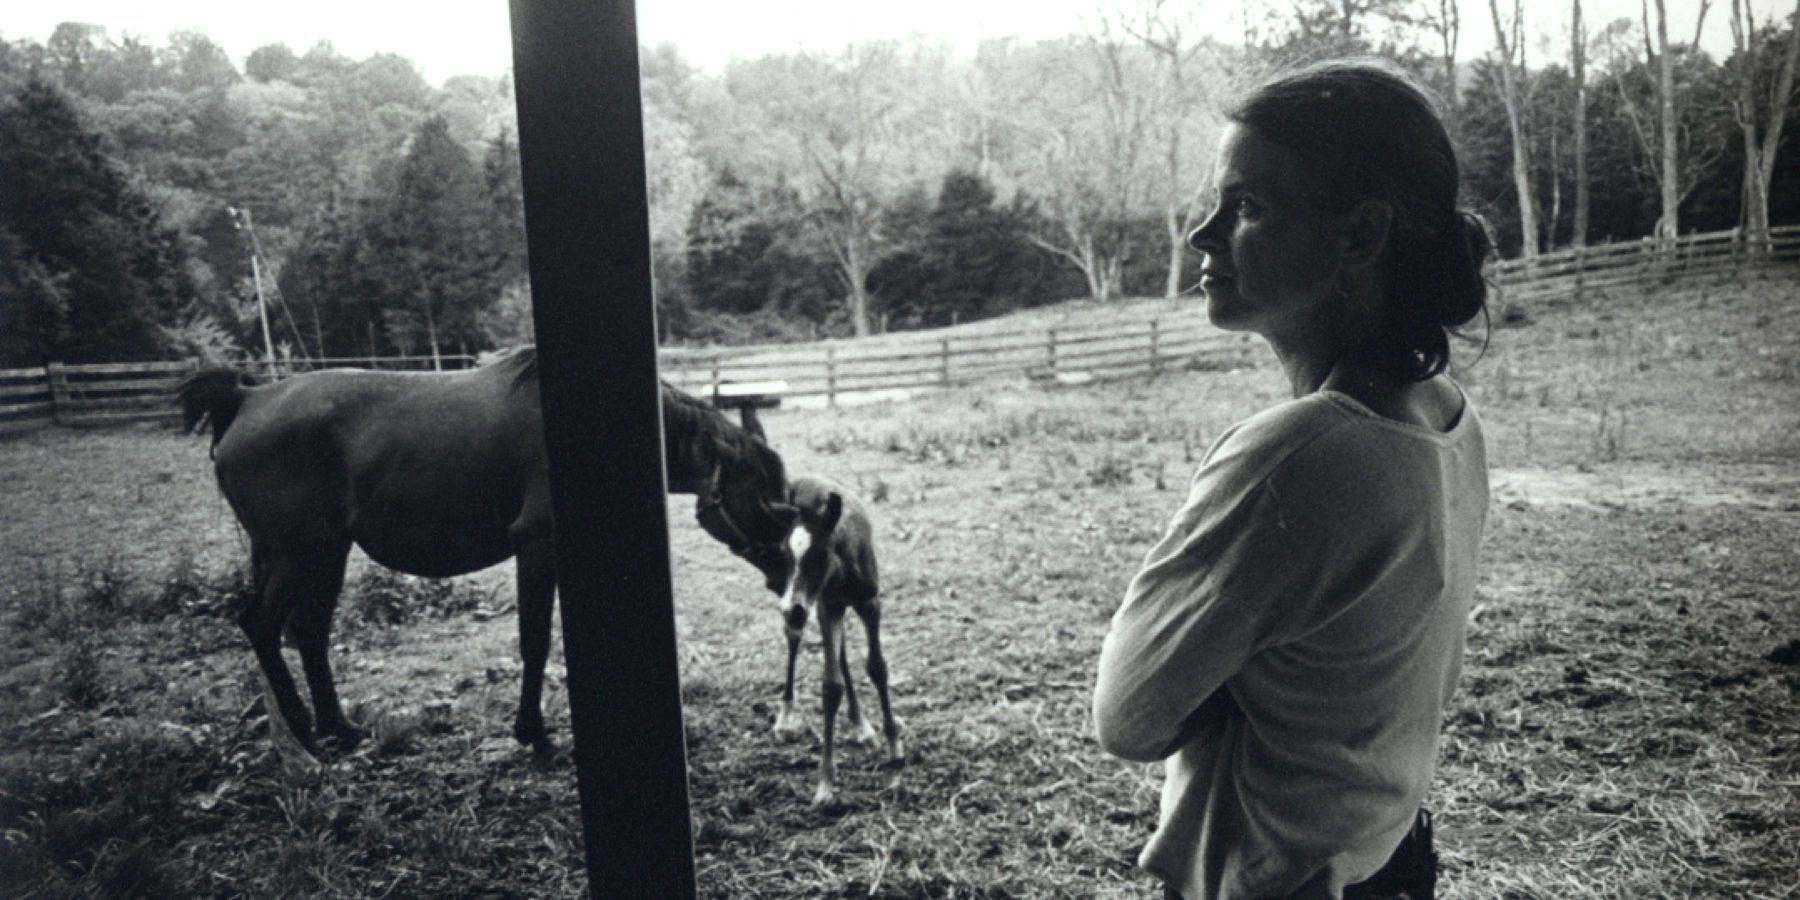 Documentary: What Remains: The Life and Work of Sally Mann